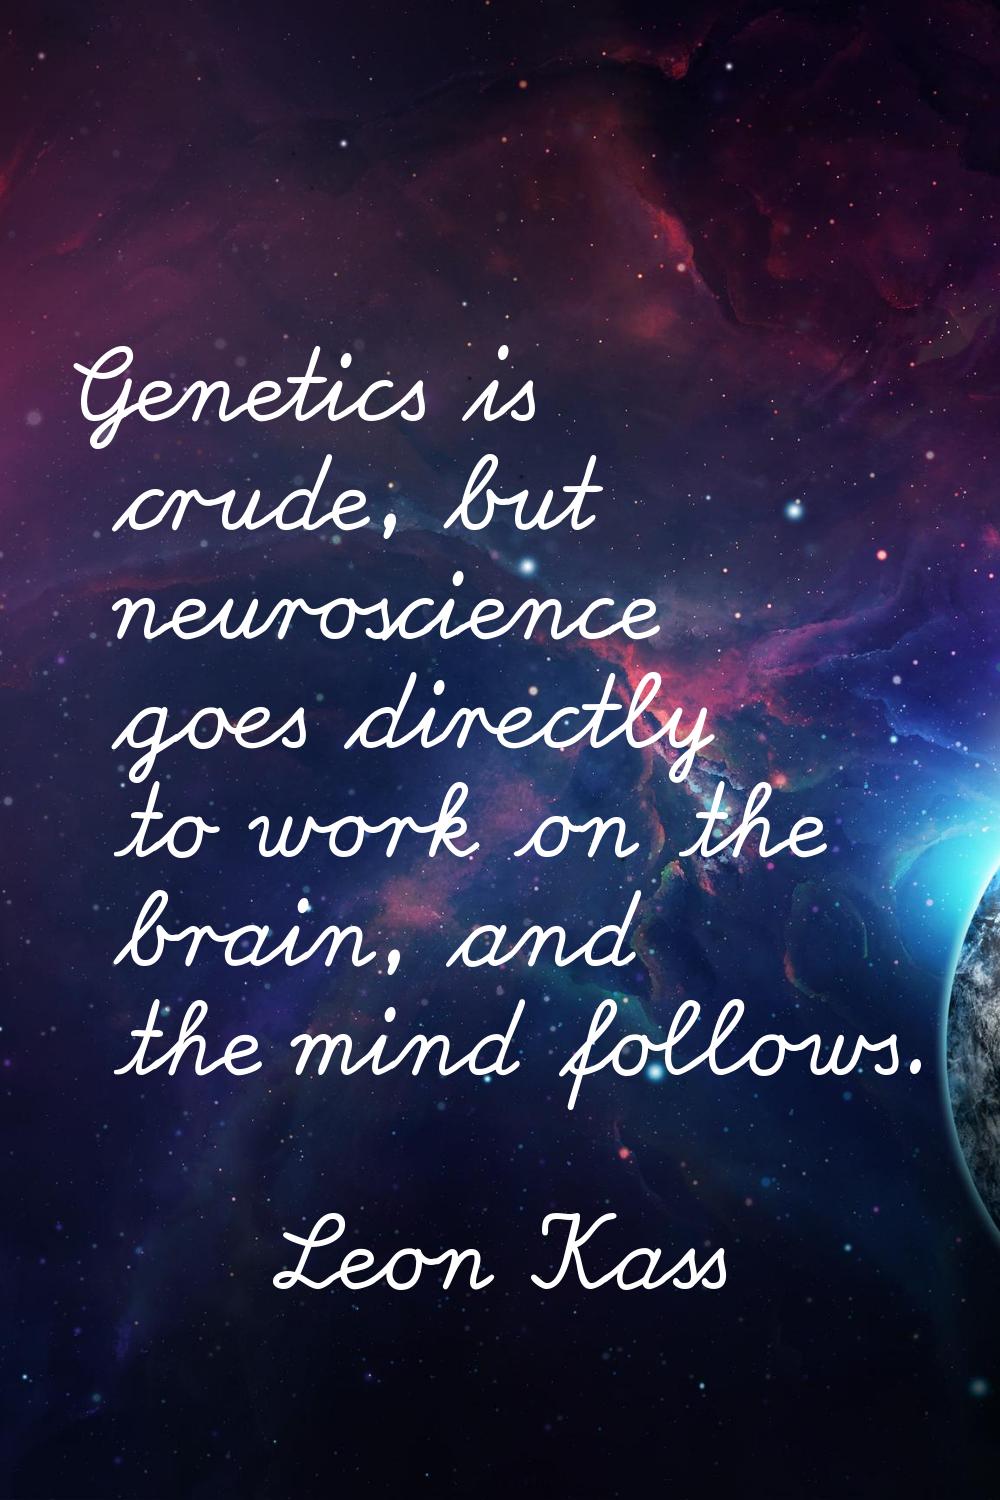 Genetics is crude, but neuroscience goes directly to work on the brain, and the mind follows.